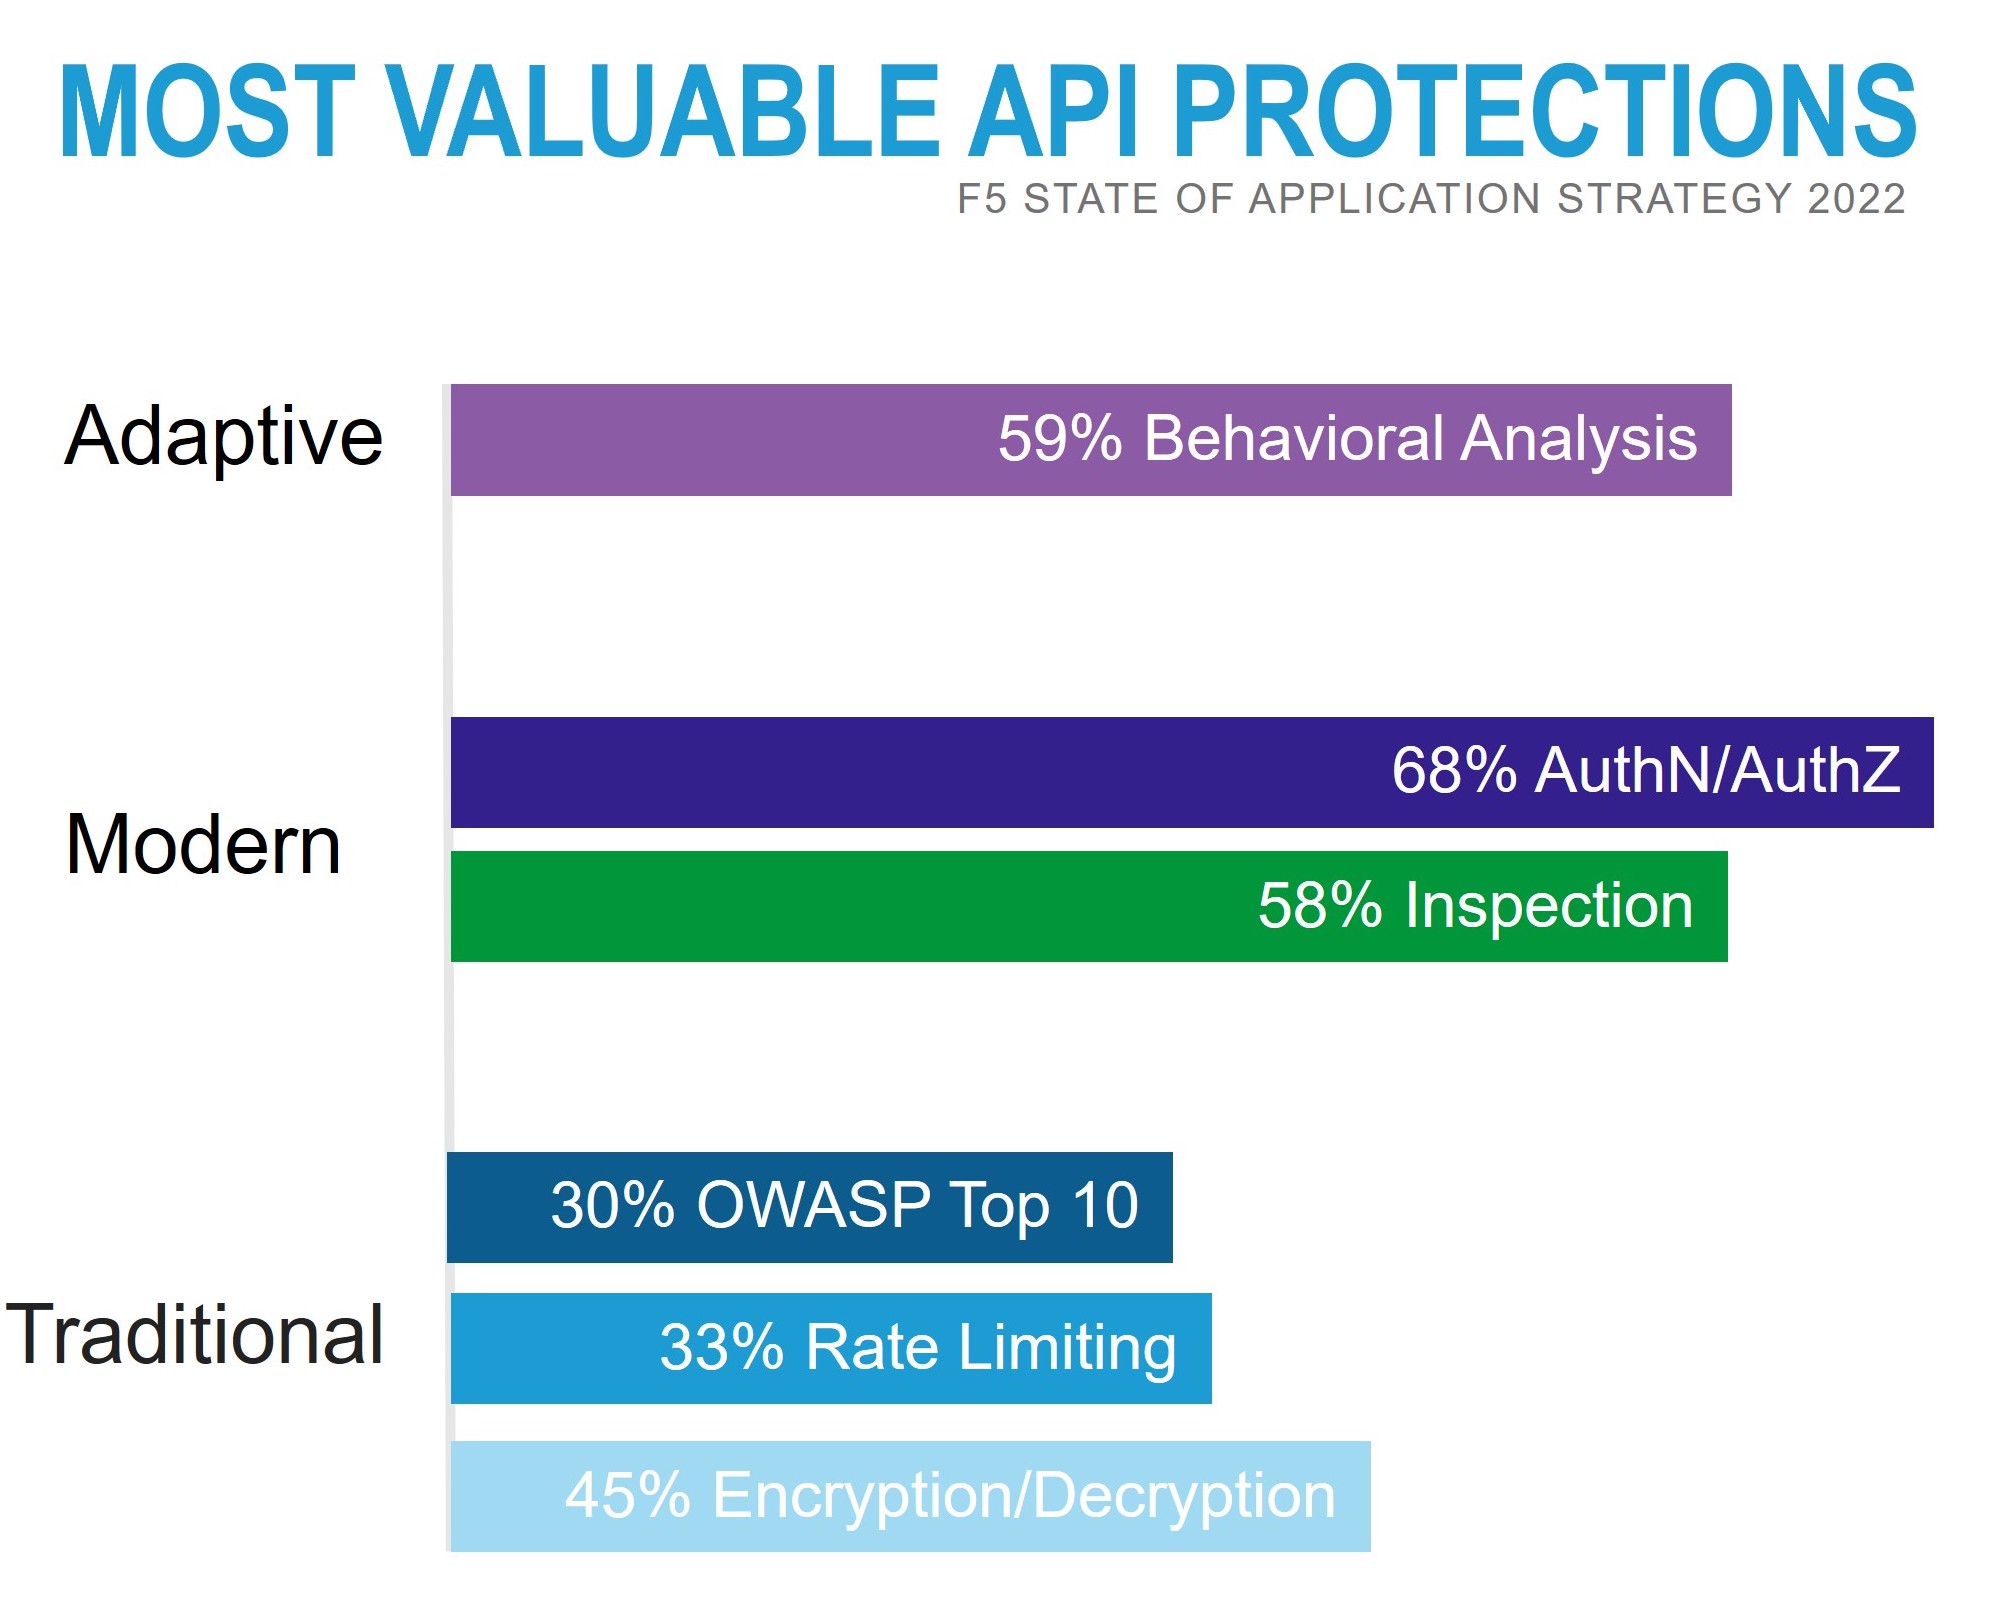 Most valuable api protections